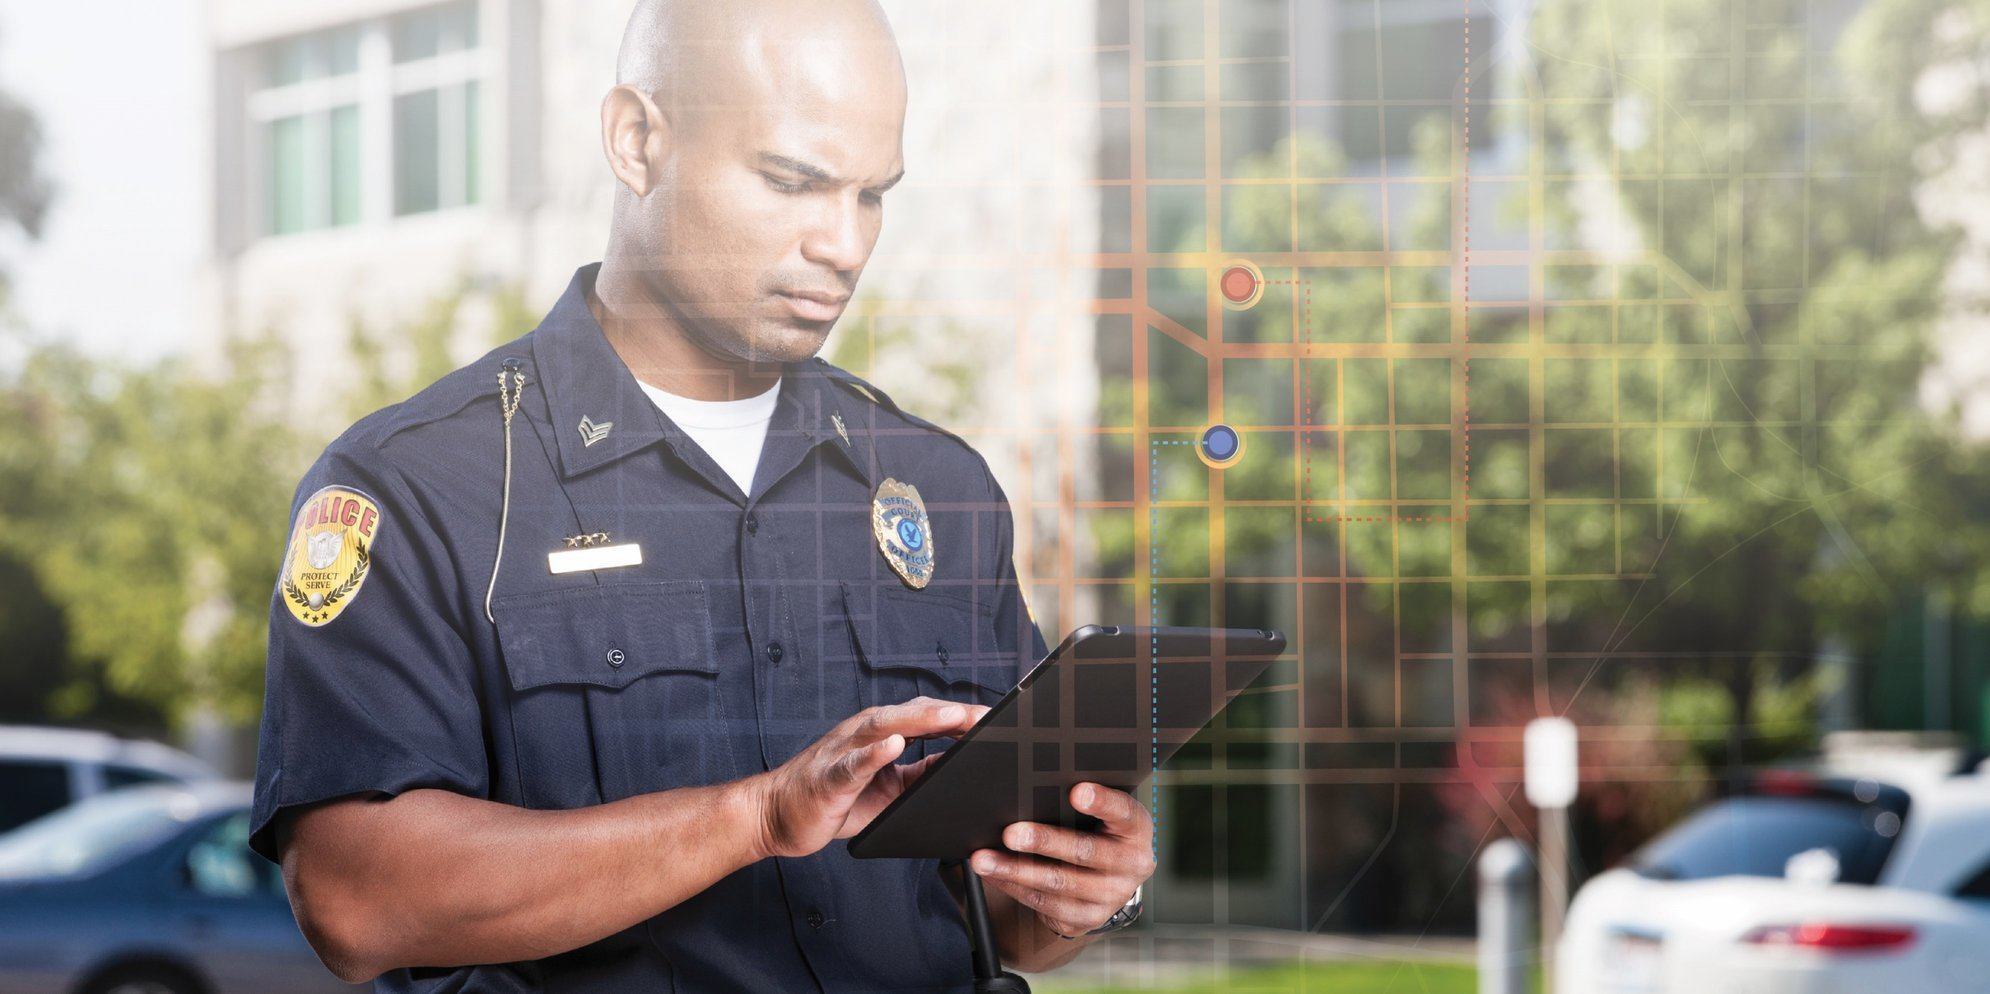 Police officer using a tablet - GIS for Public Safety